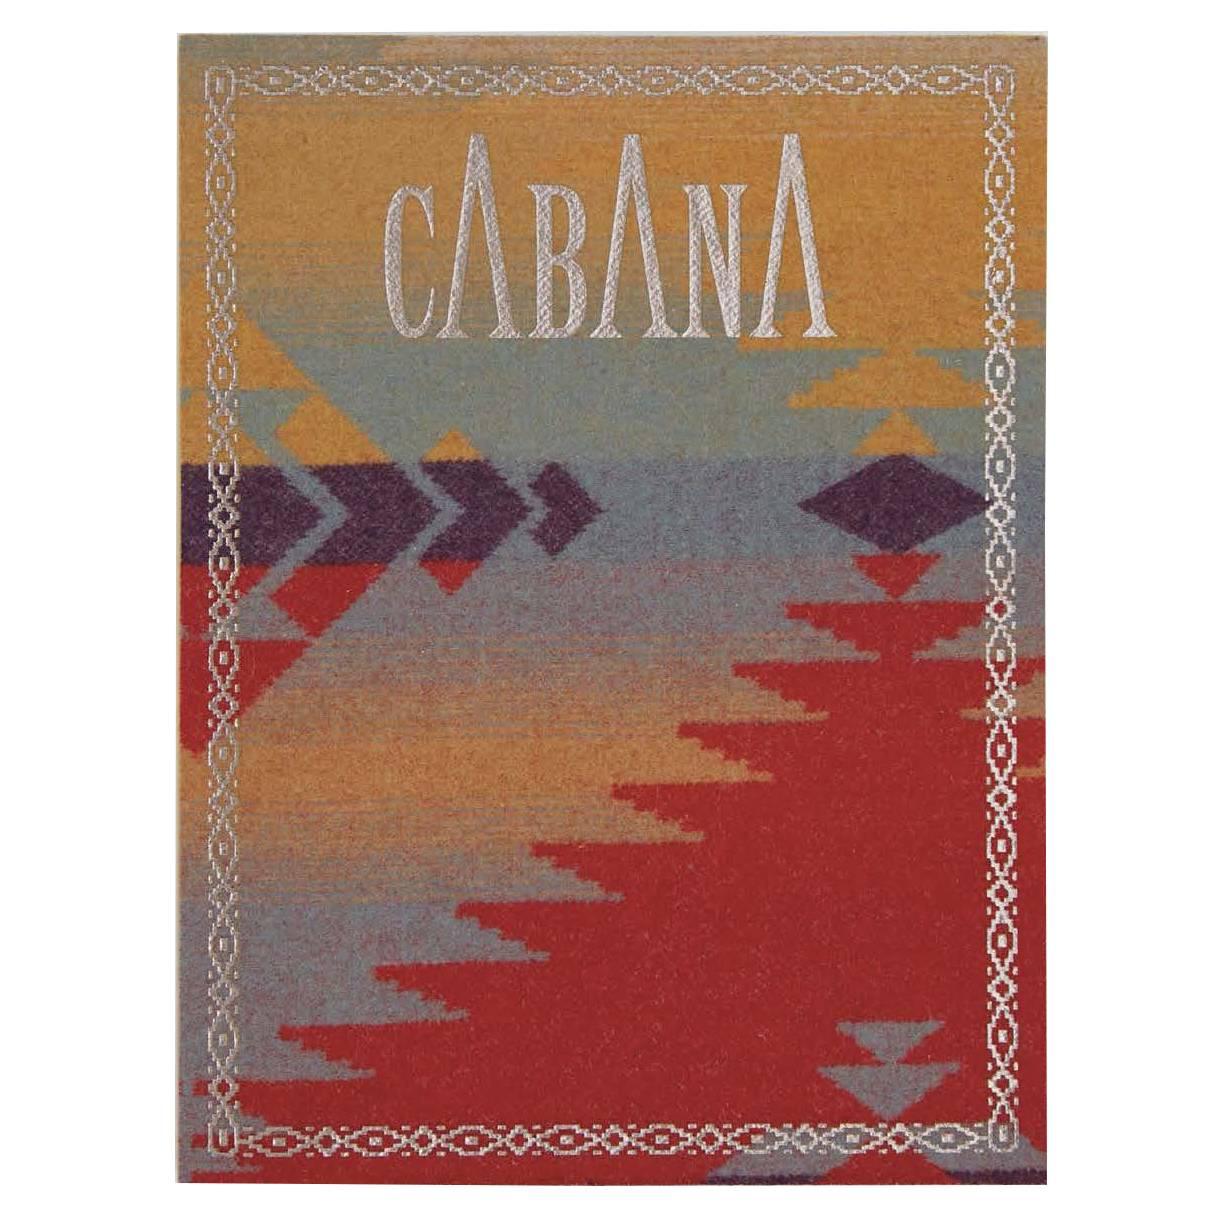 Cabana Magazine Issue 8, in Collaboration with Ralph Lauren For Sale